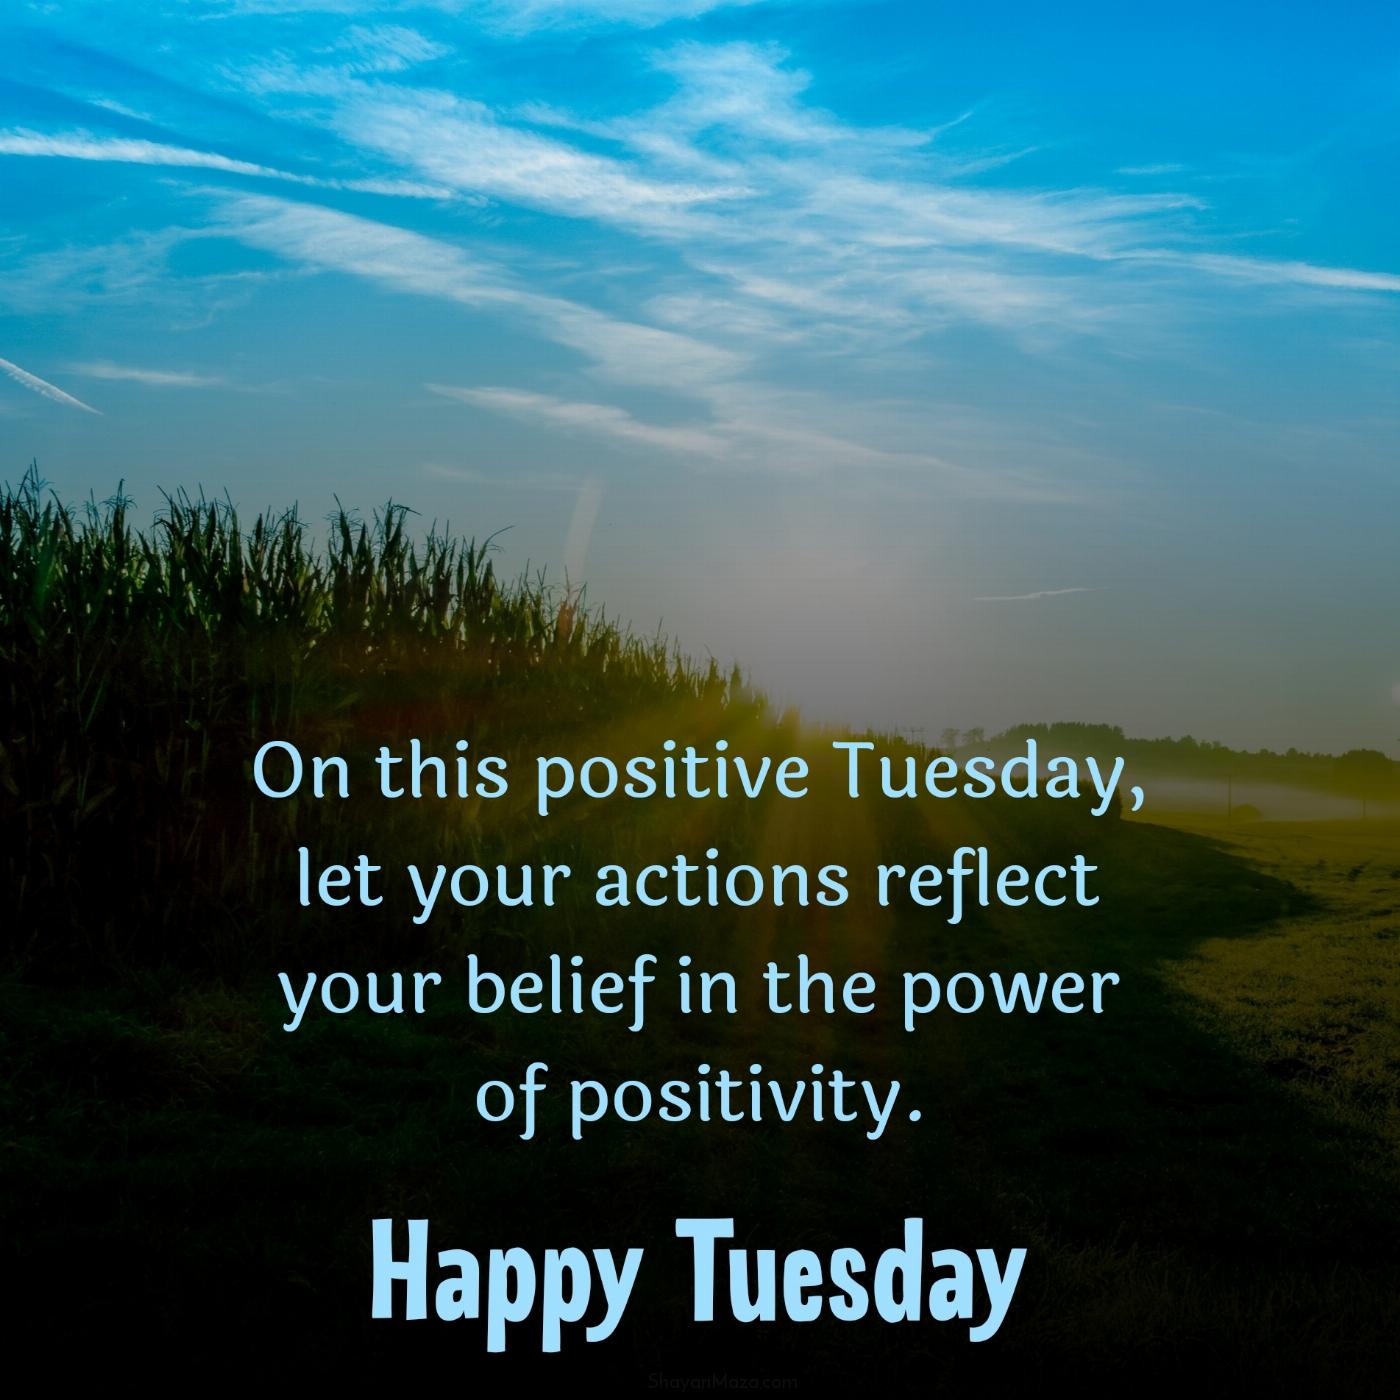 On this positive Tuesday let your actions reflect your belief